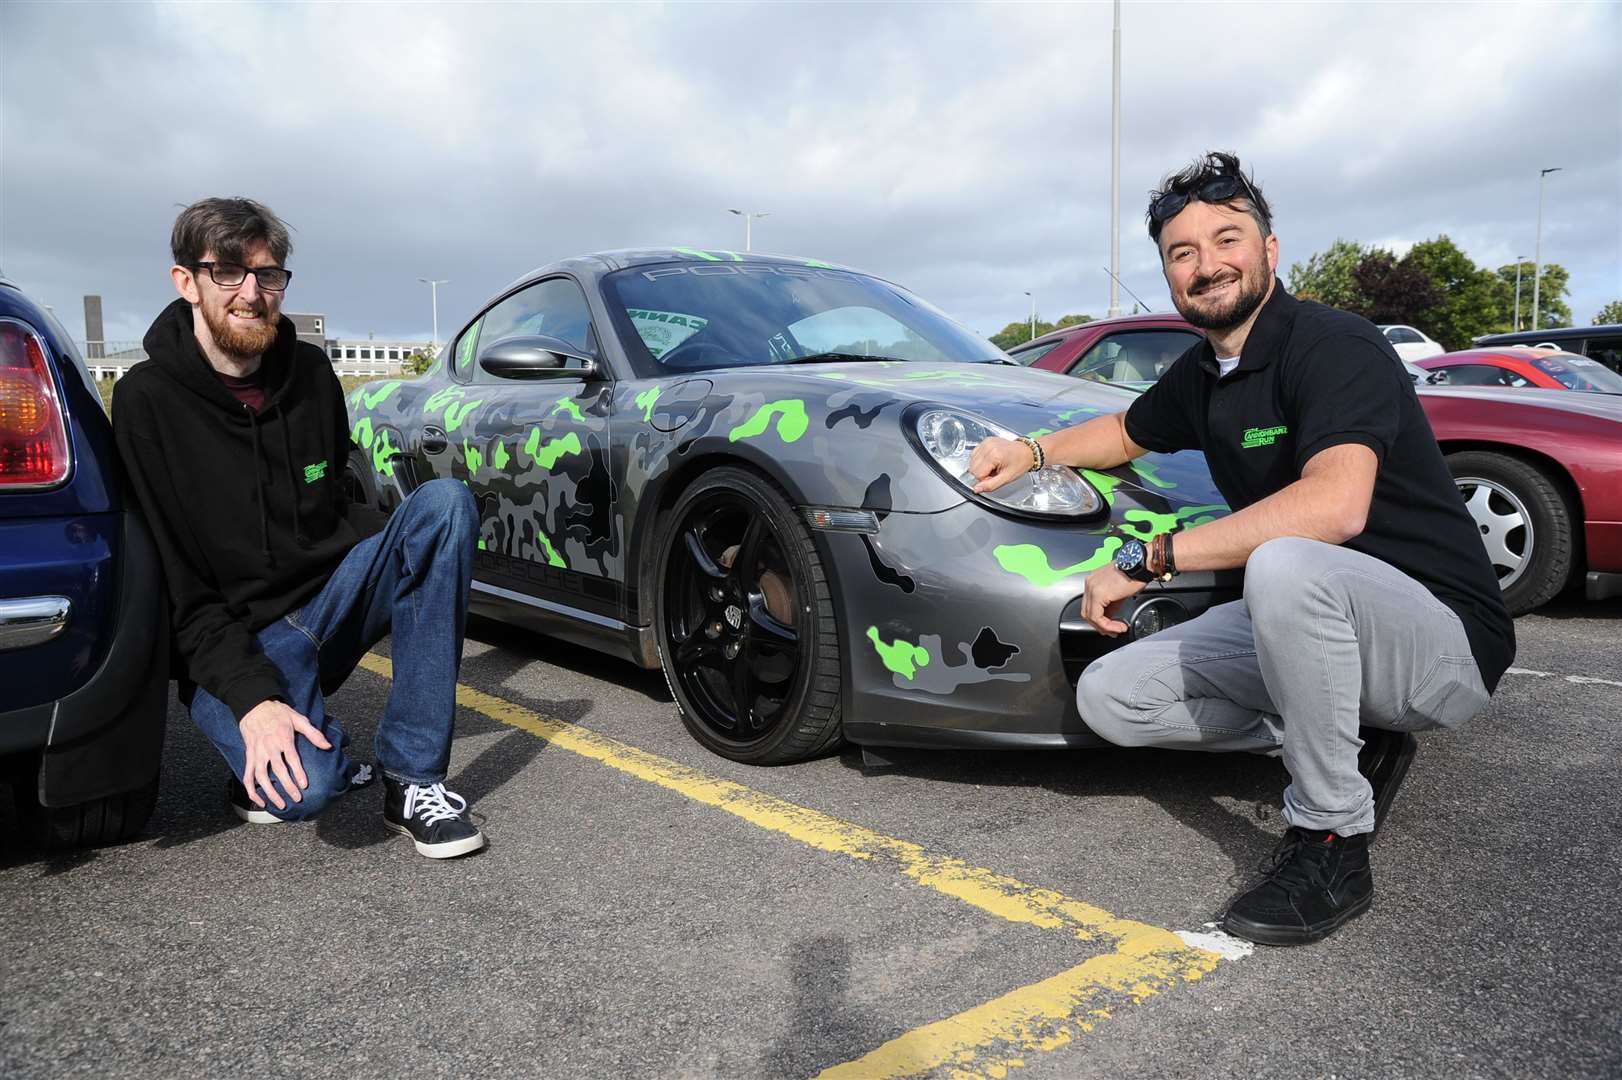 Picture: Eric Cormack. Image No. 041886. EVENT ORGANISER KRIS O'NEILL [RIGHT] AND HIS BROTHER LIAM BESIDE HIS PORCHE.